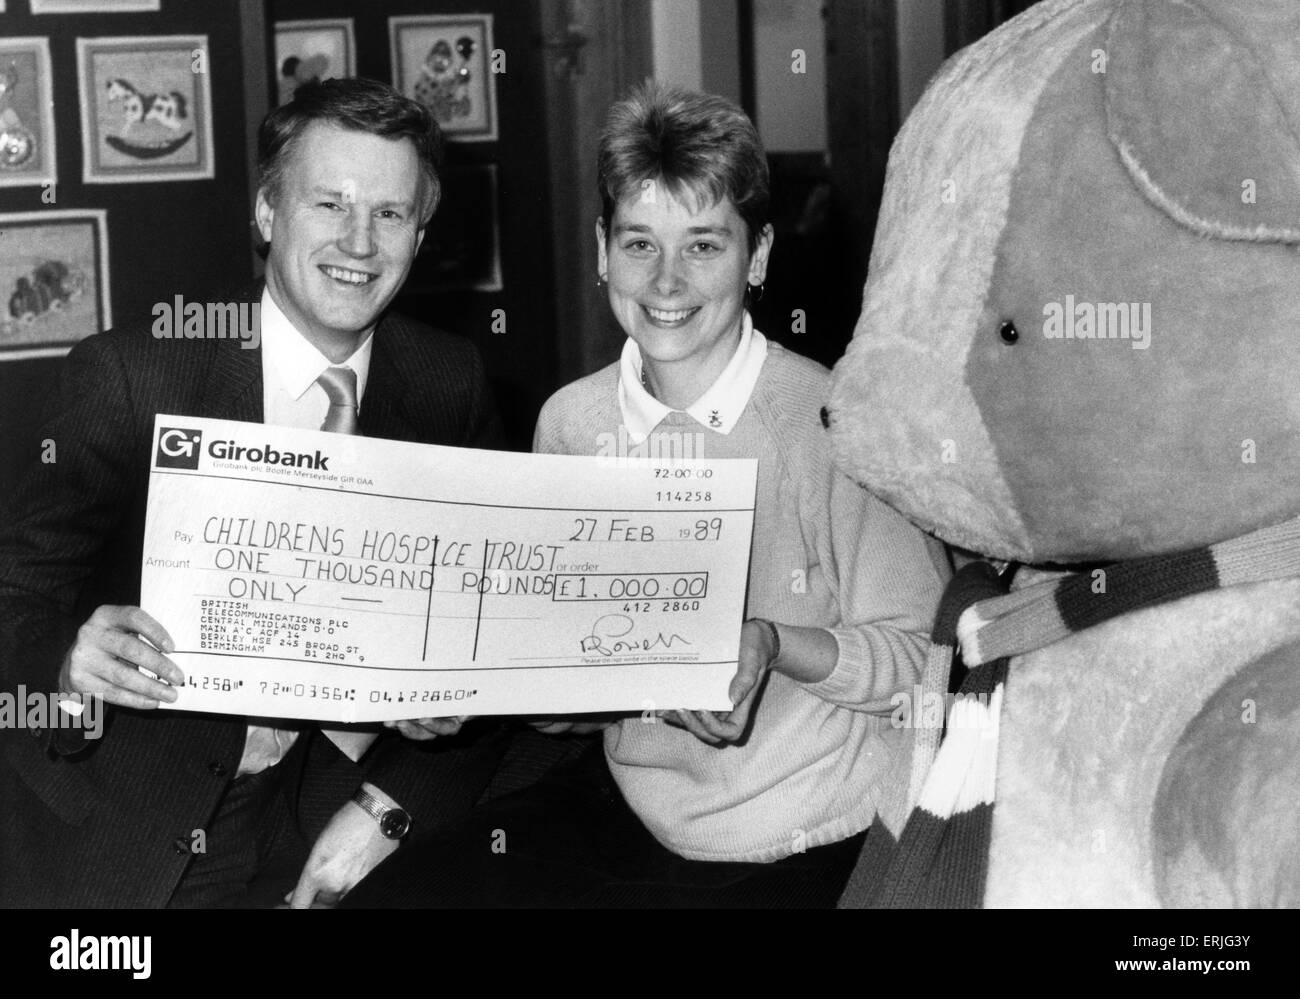 Lowry Stanage, British Telecom's West Midlands General Manager presents £1,000 cheque to Sister Clare Buckle of Acorns Children's Hospice, Oak Tree Lane, Selly Oak, Birmingham. 27th February 1989.  Reproduction Prohibited without the Written Consent of the Management Stock Photo